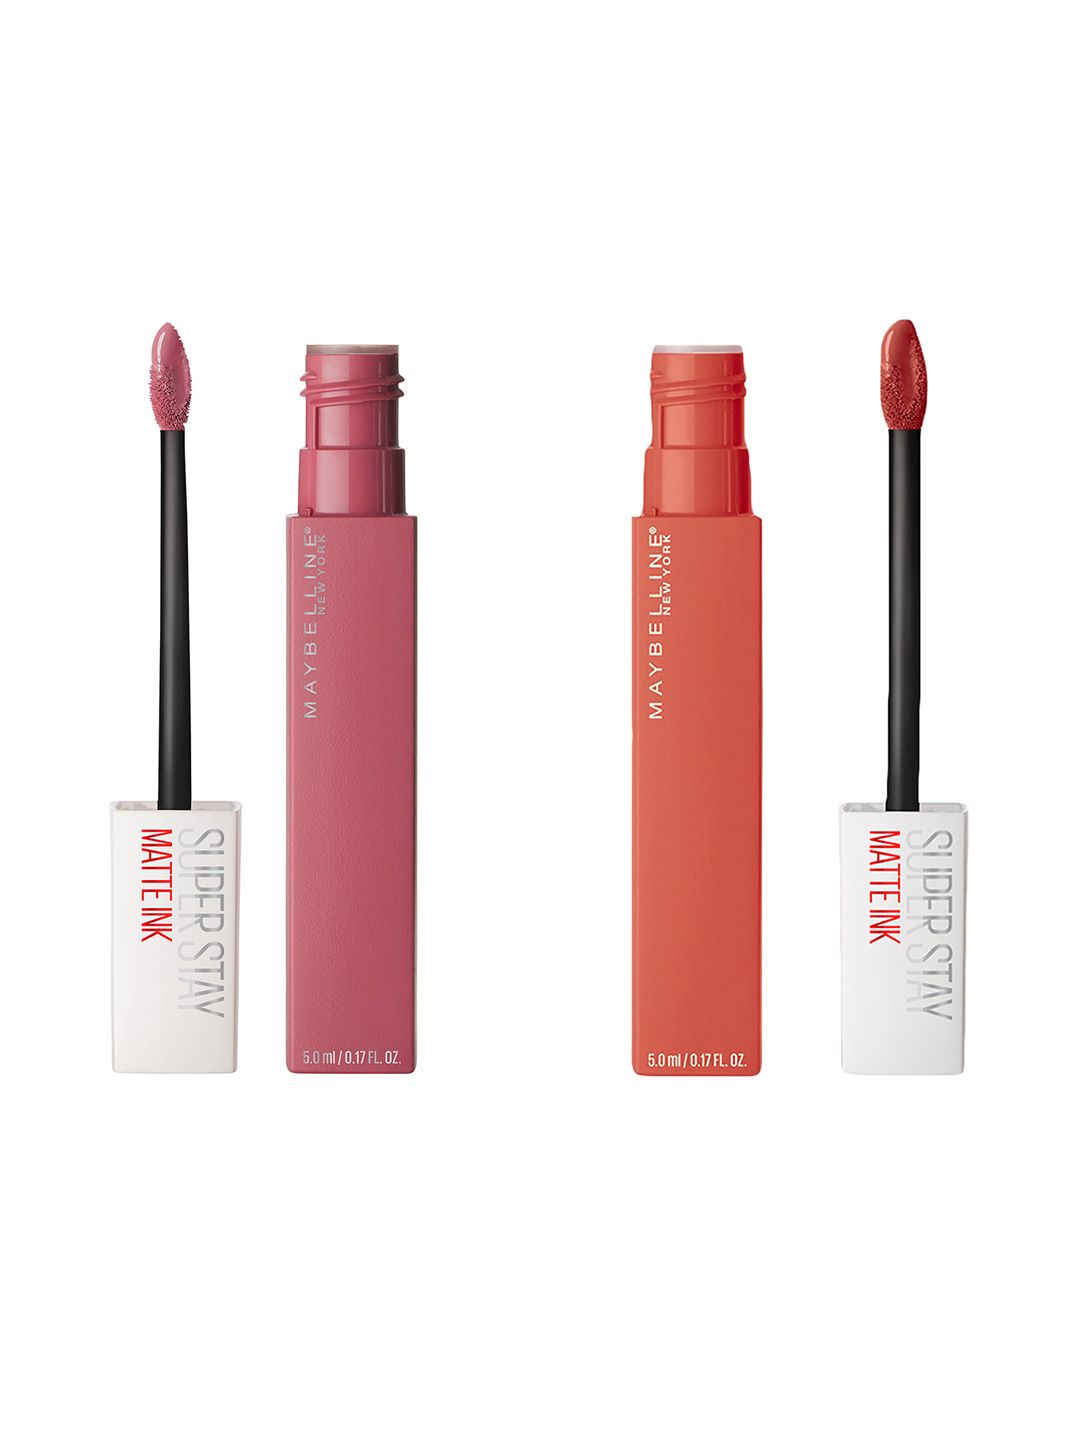 Maybelline New York Super Stay Set Of 2 Matte Ink Liquid Lipstick Price in India